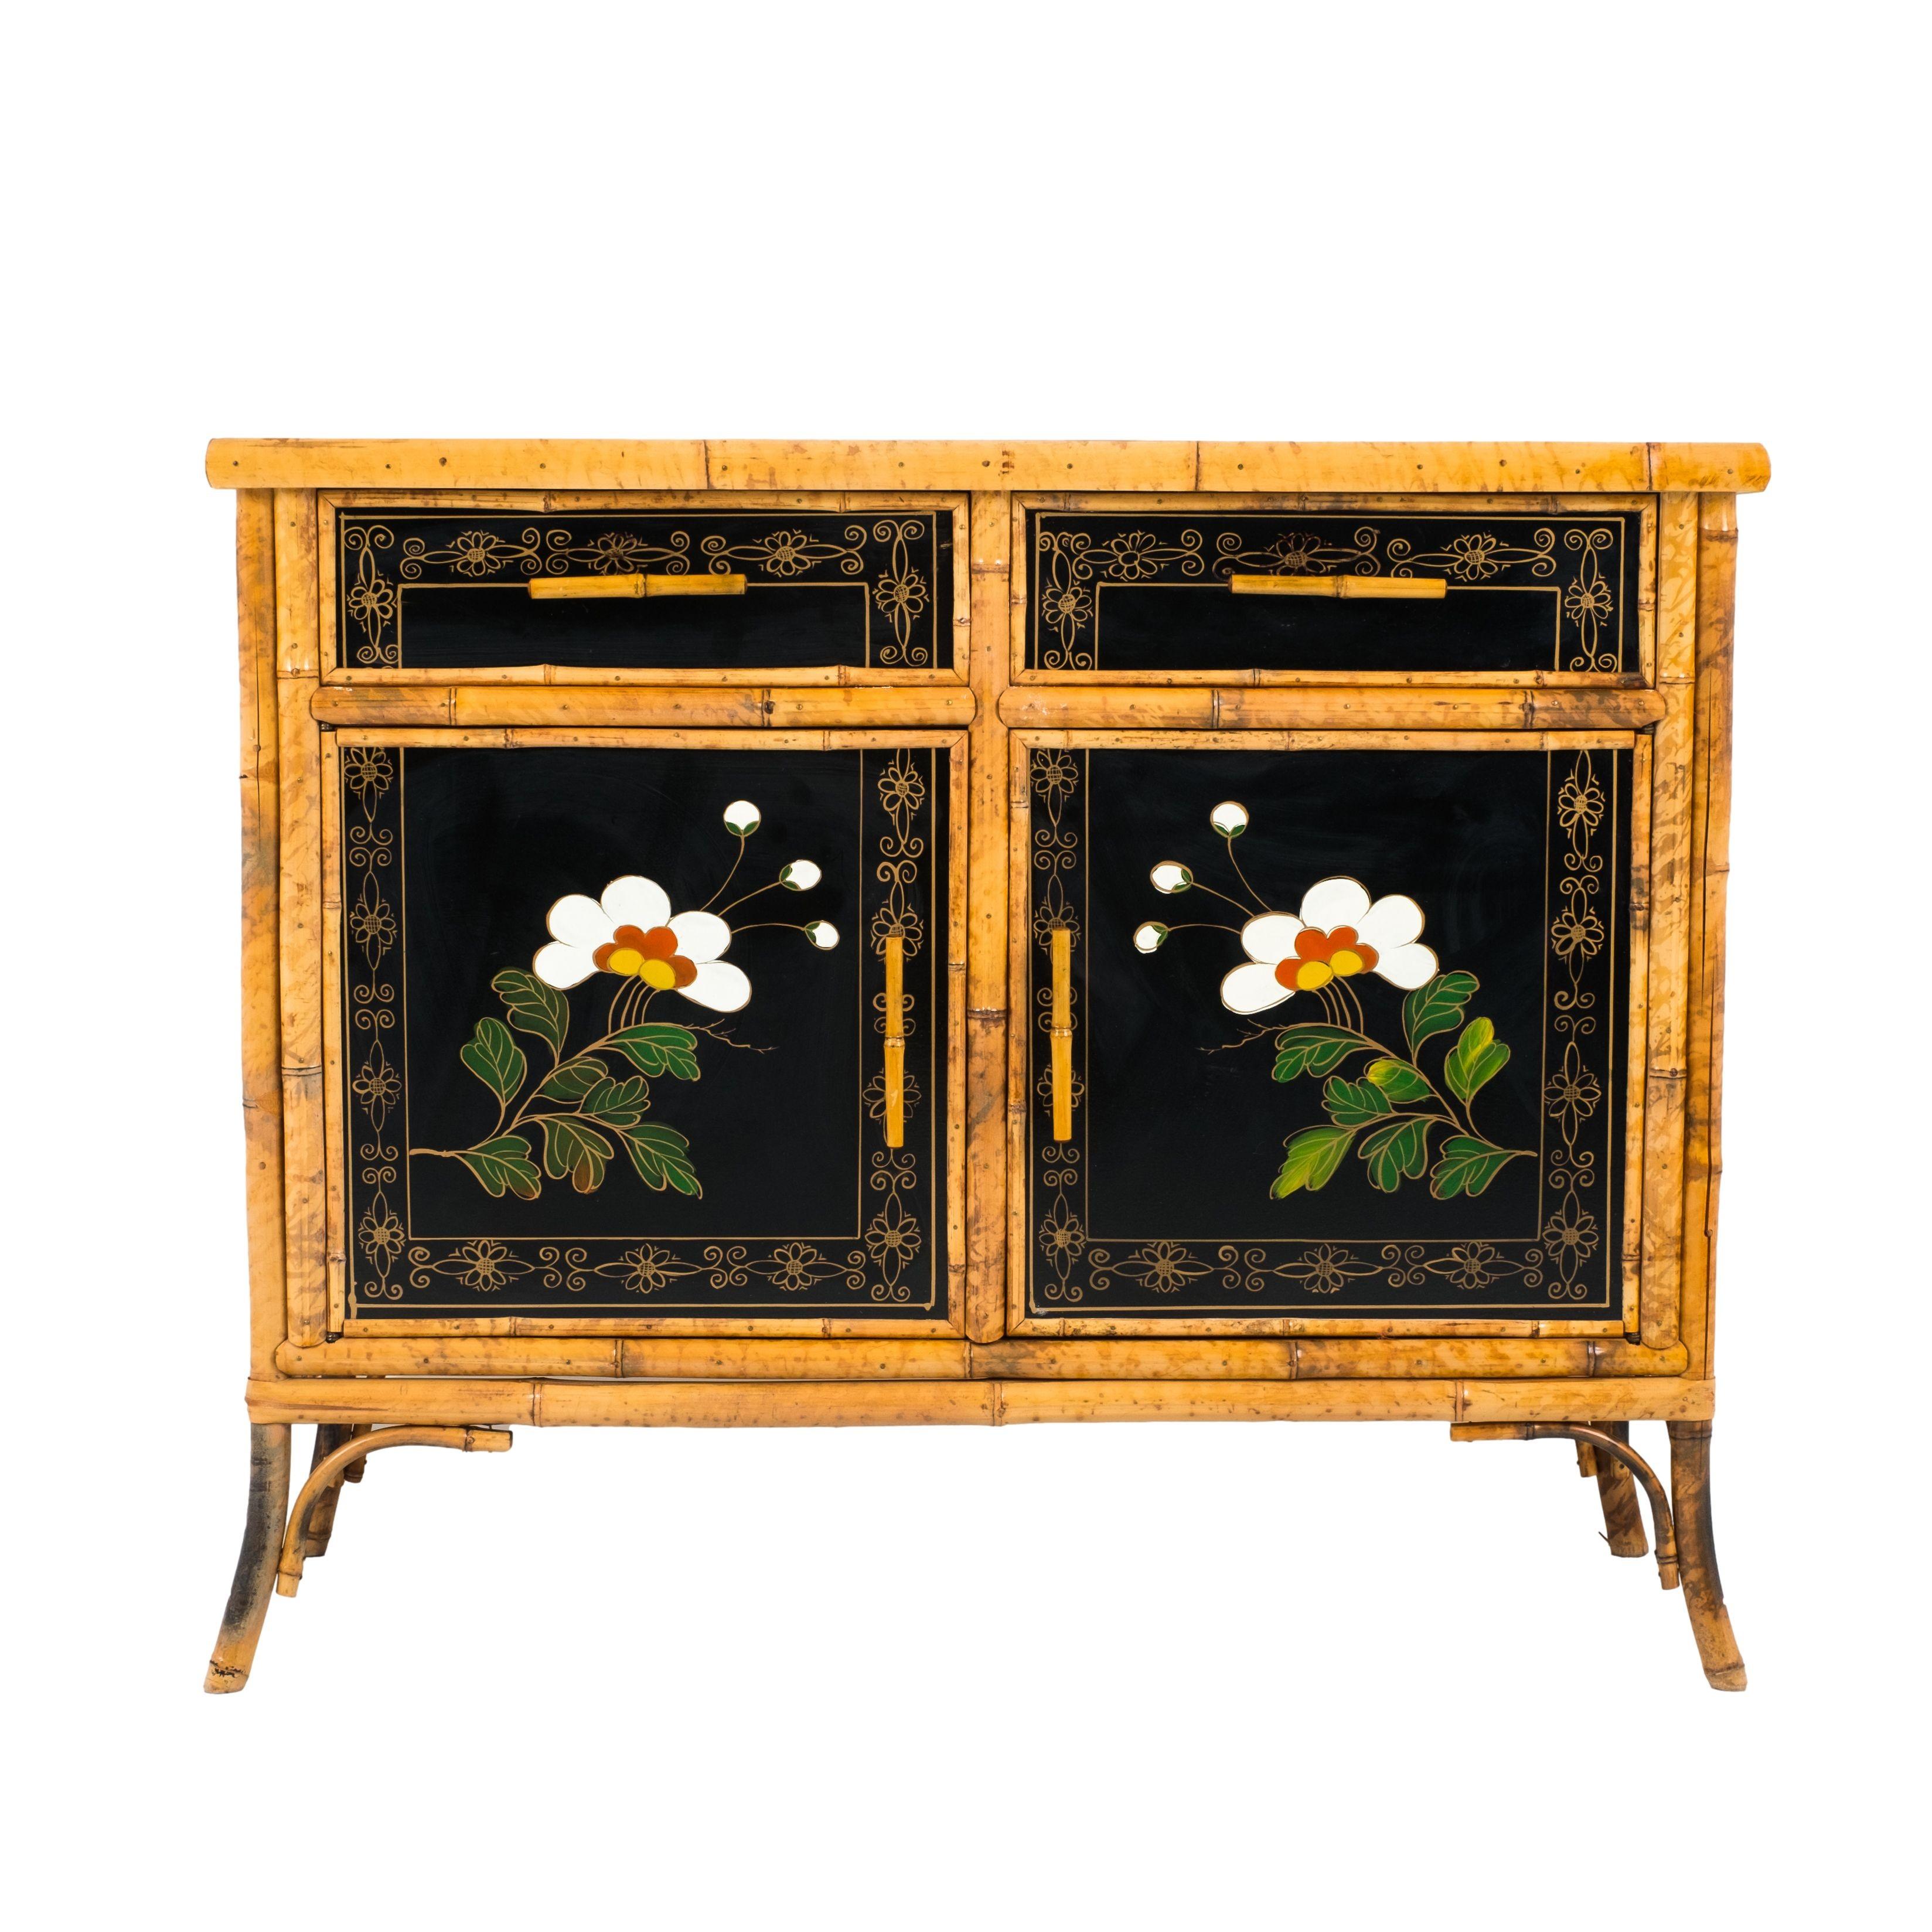 English bamboo framed black leather topped cabinet in the Anglo-Japanese Aesthetic Movement taste. The cabinet features floral painted decorations on the black lacquered paper side panels, as well as on the faces of two shallow drawers over two wood